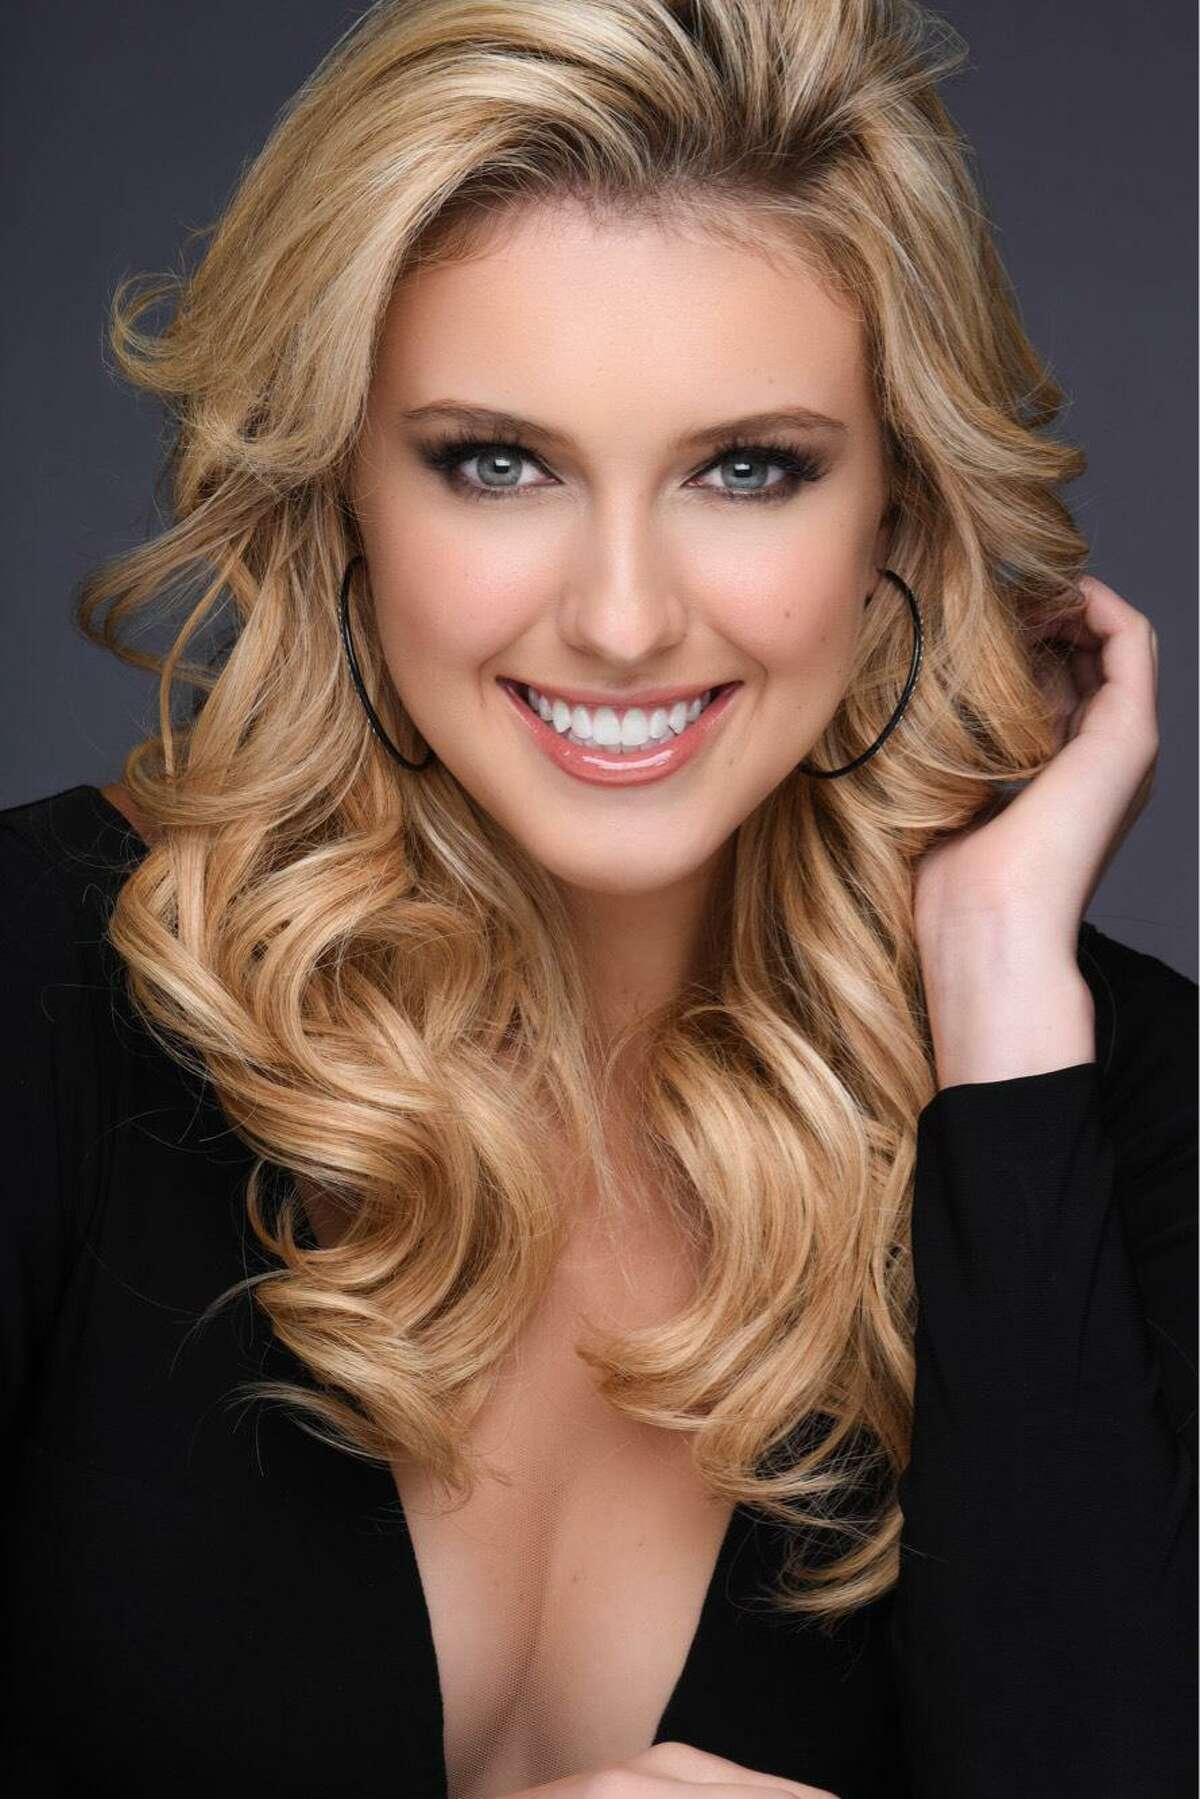 Acacia Courtney of Hamden is a contestant in this year’s Miss USA 2019 contest.